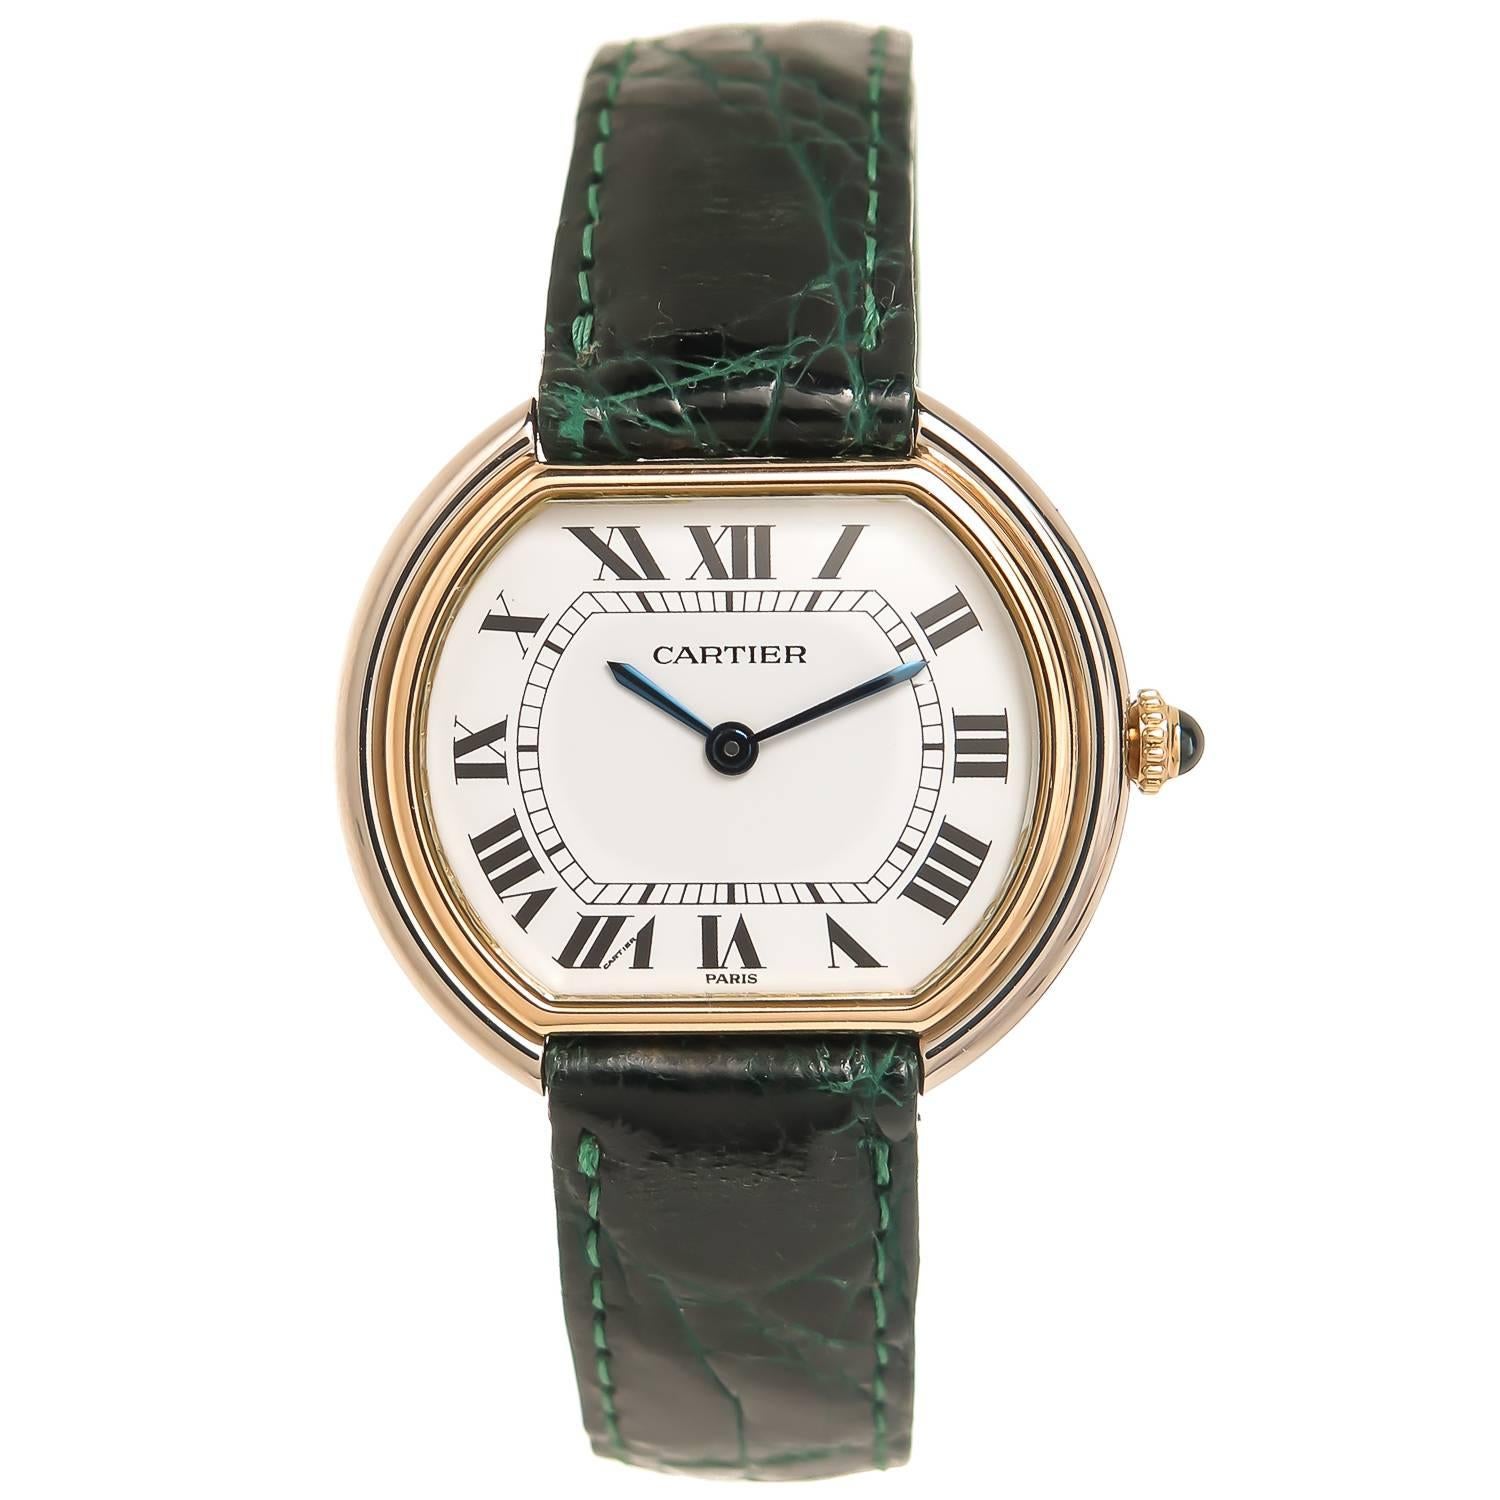 Cartier Yellow and White Gold Ellipse Wristwatch